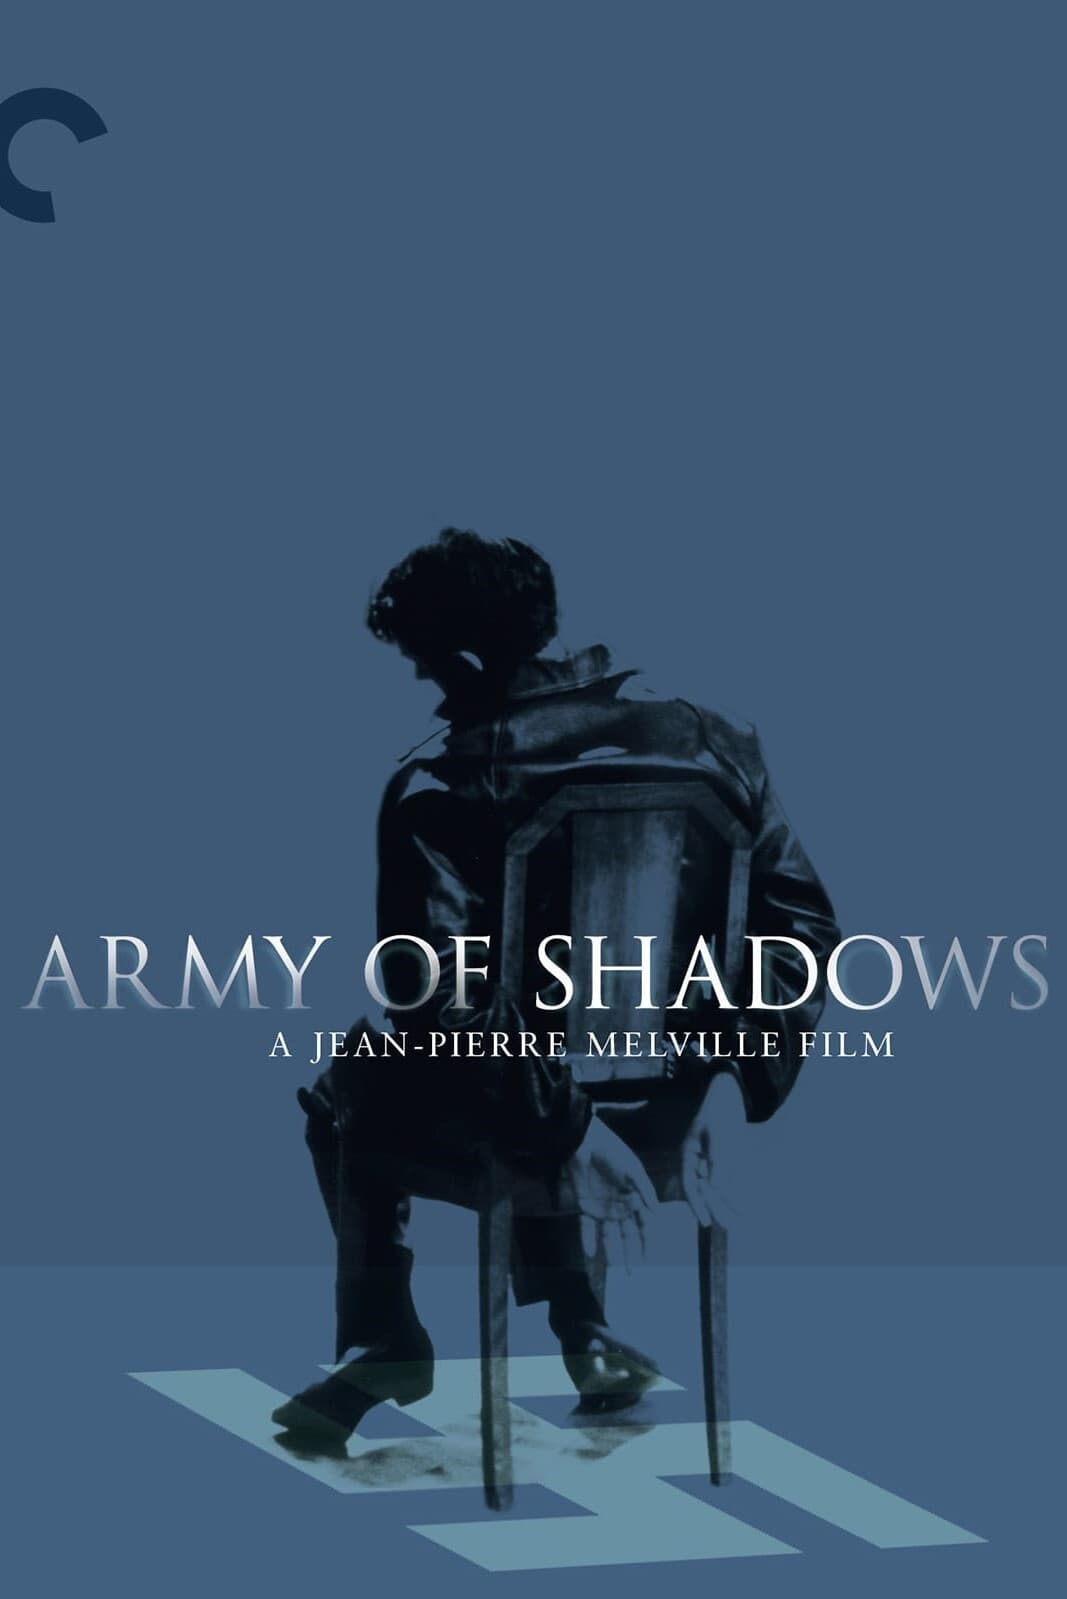 Jean-Pierre Melville and Army of Shadows